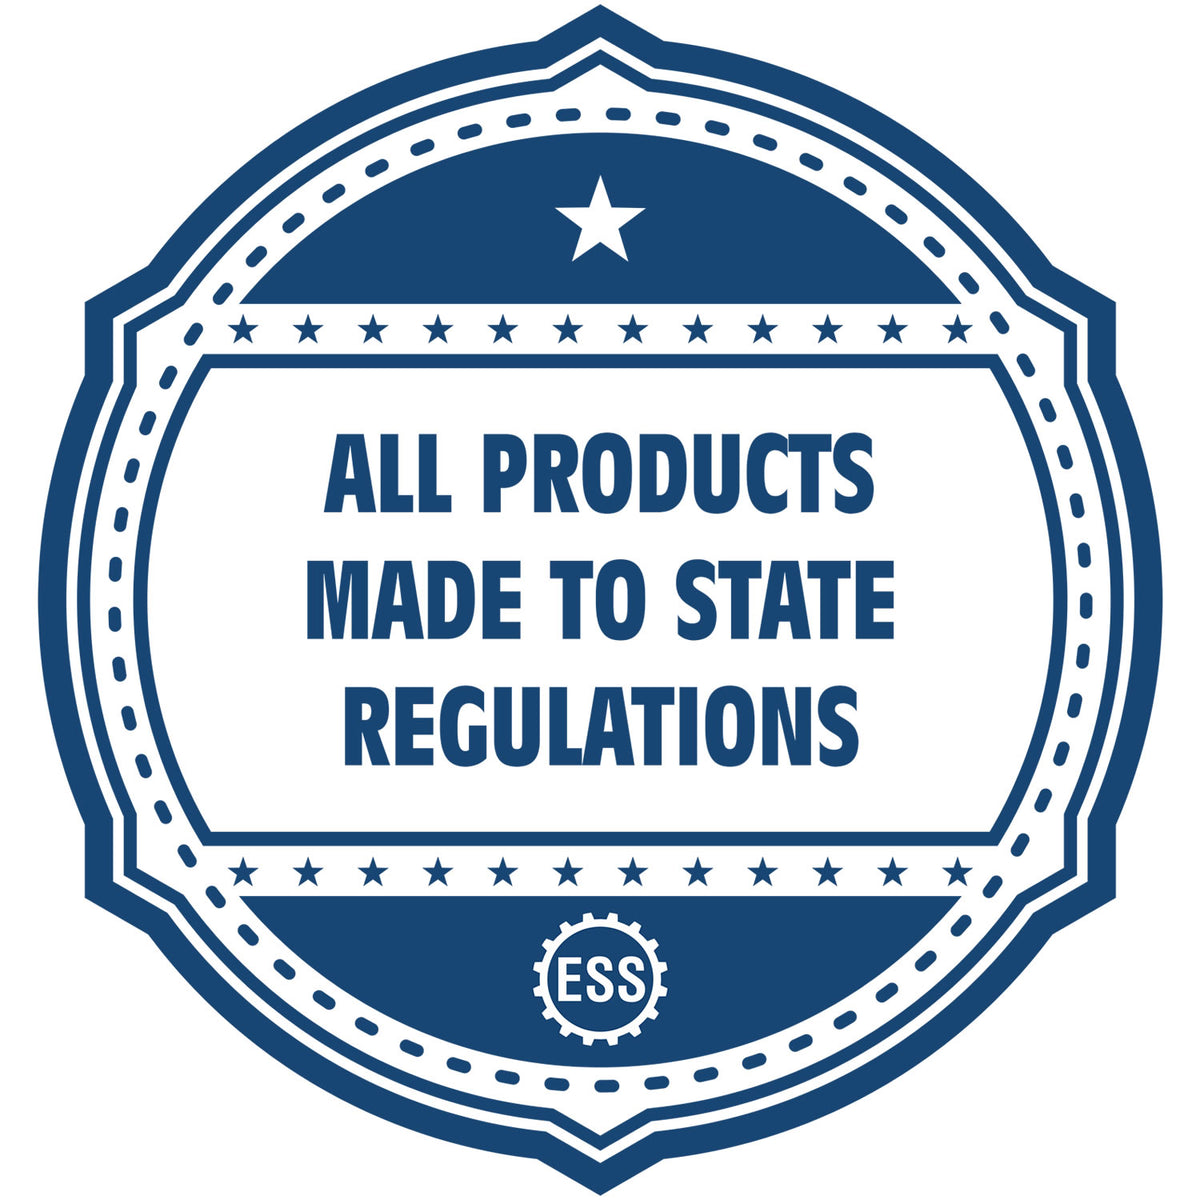 An icon or badge element for the Pennsylvania Desk Architect Embossing Seal showing that this product is made in compliance with state regulations.